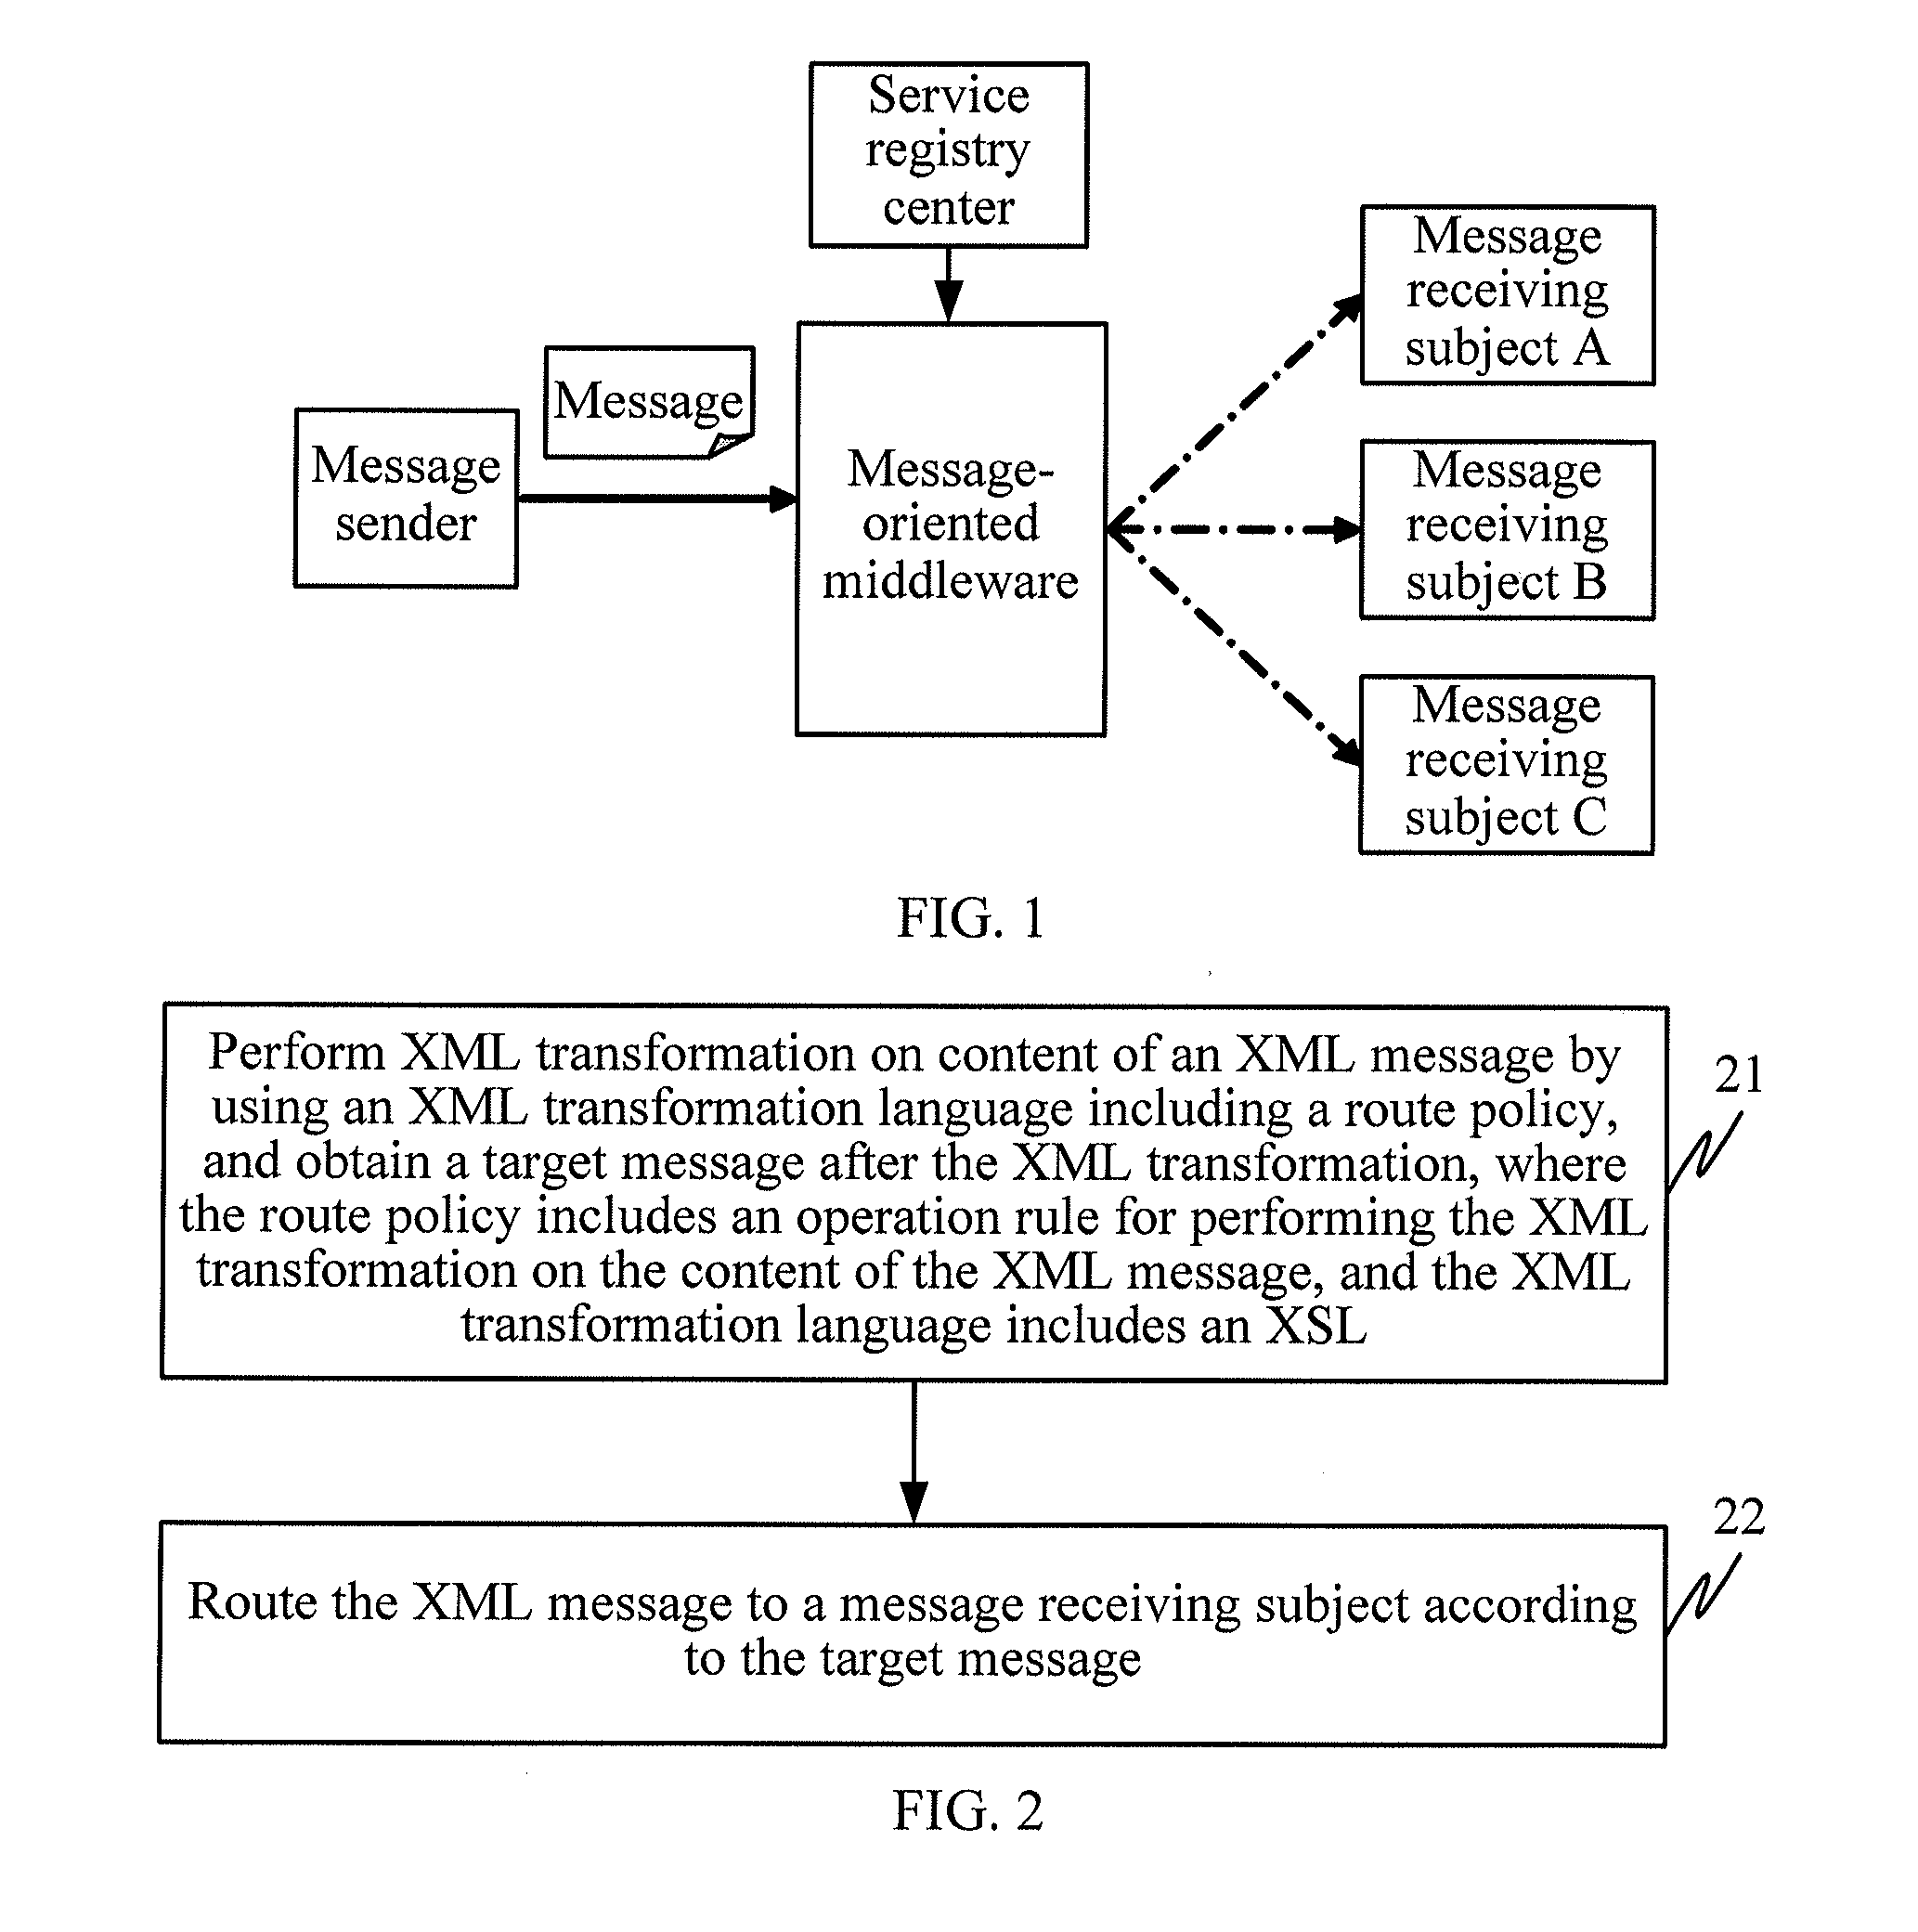 Message routing method and message routing device